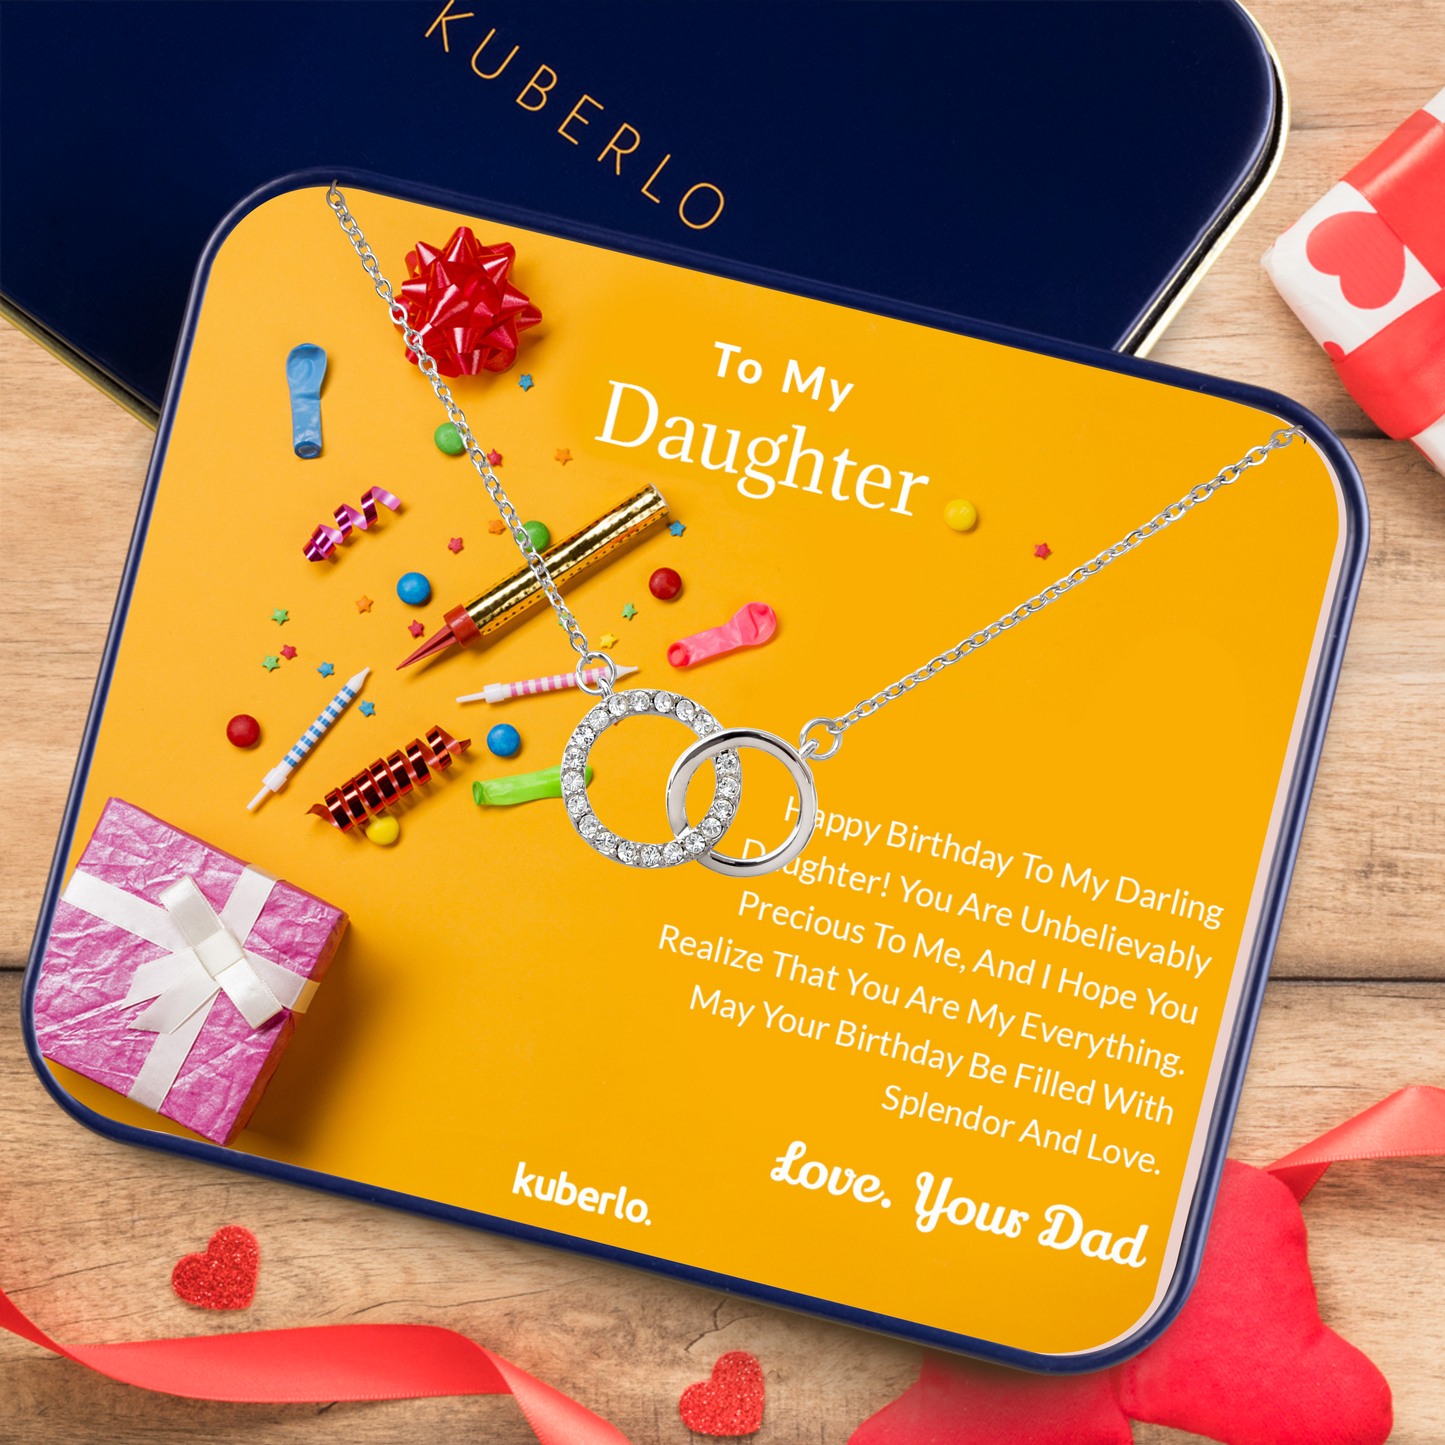 Birthday Gift - Dear Daughter - You are my everything